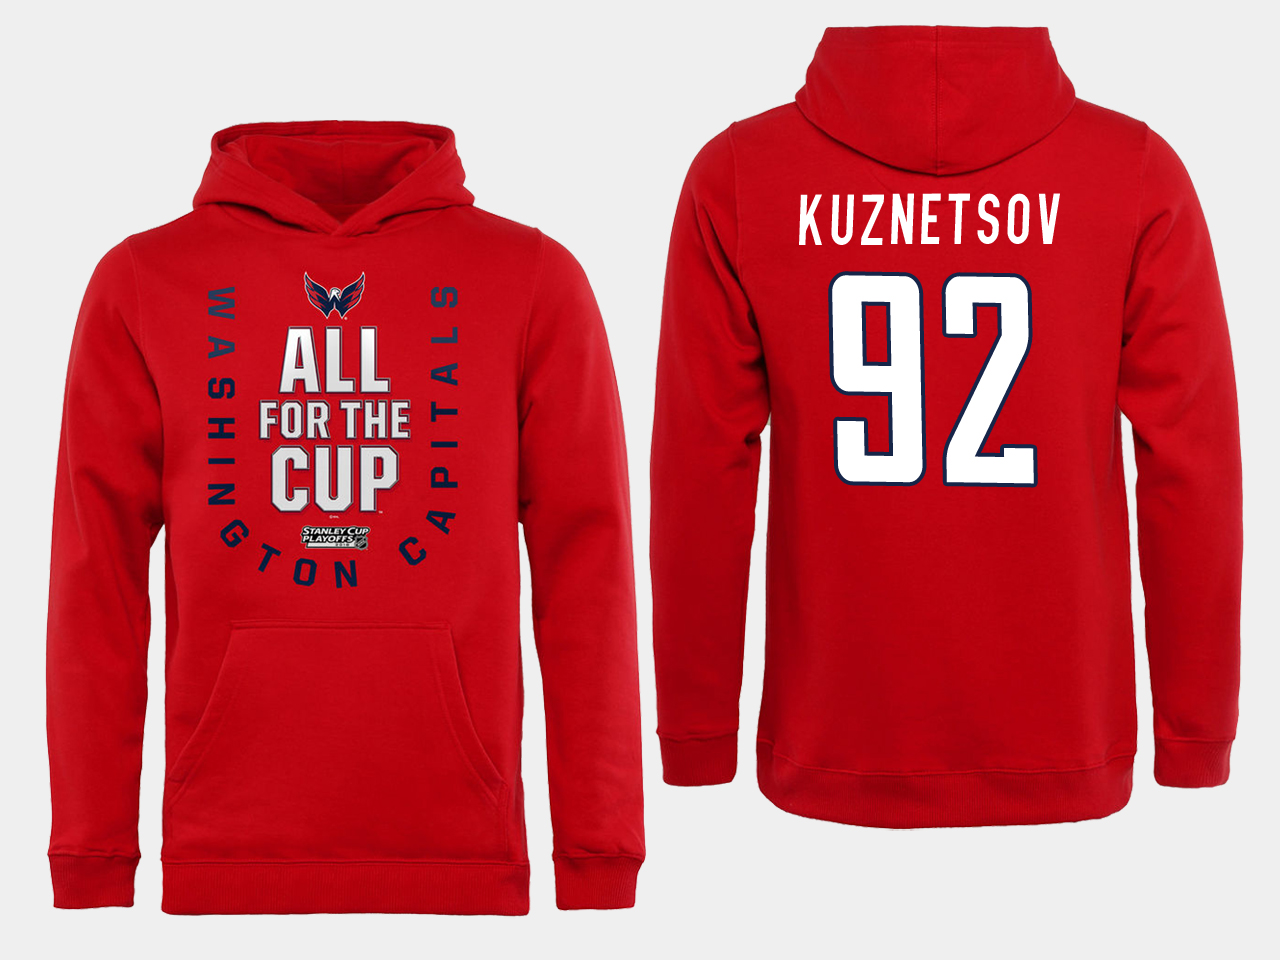 Men NHL Washington Capitals #92 Kuznetsov Red All for the Cup Hoodie